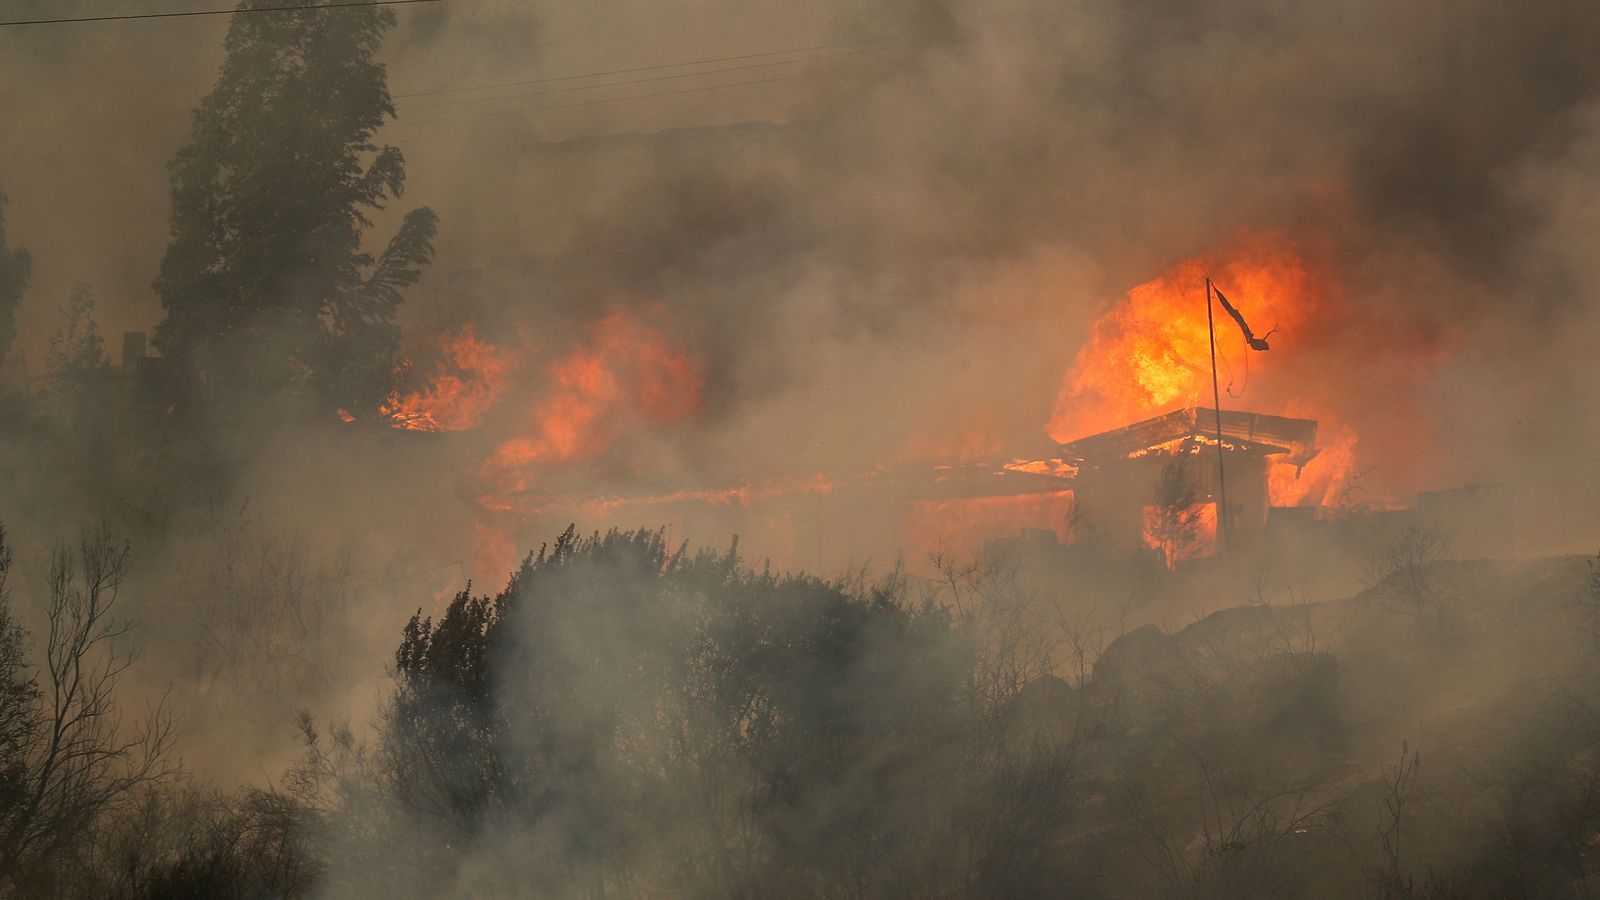 Chile wildfires: At least 112 killed in 'tragedy of very great magnitude'